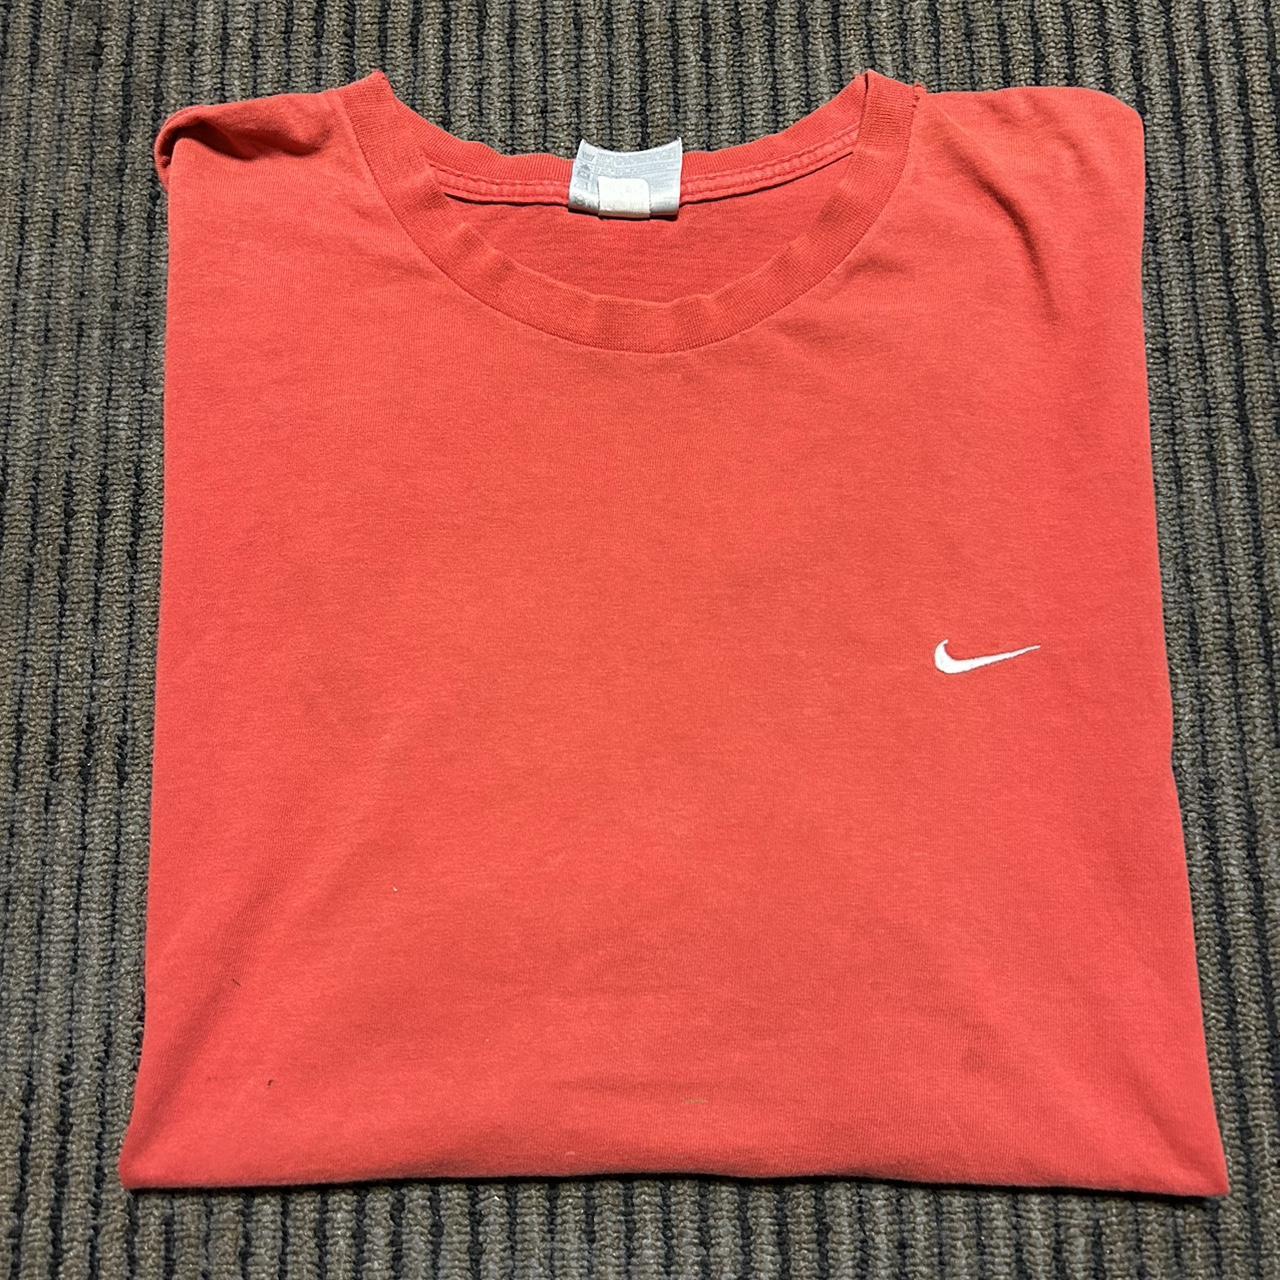 Nike Men's Red and White T-shirt